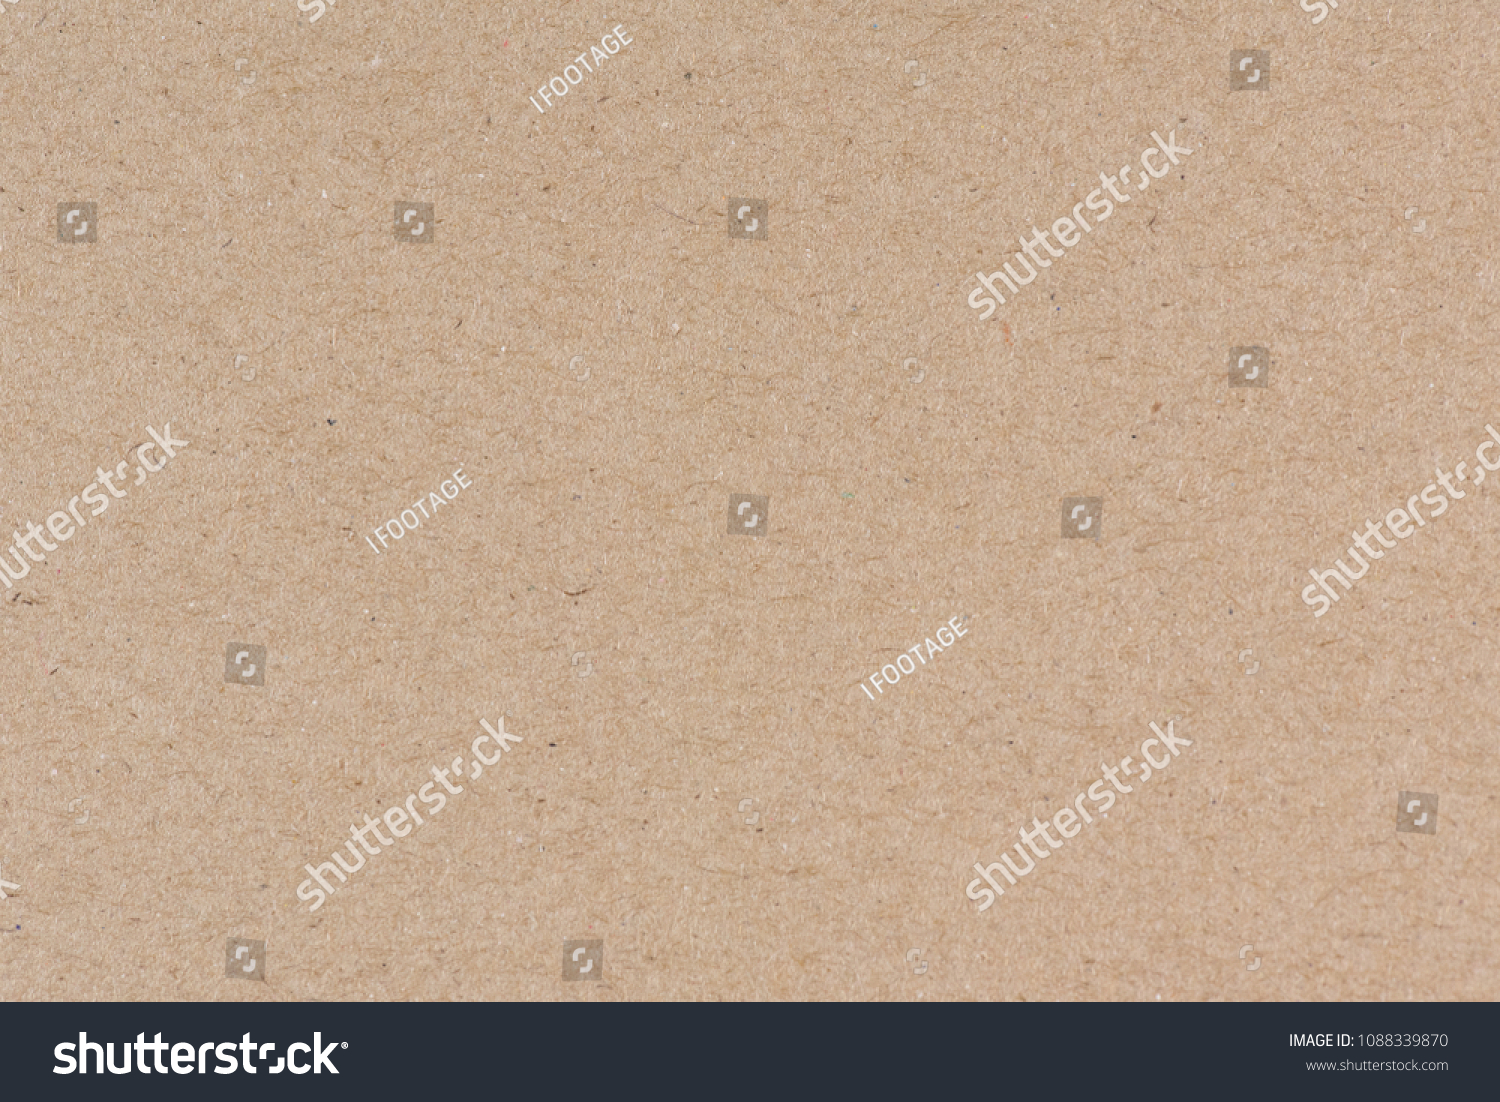 Sheet of brown paper useful as a background #1088339870